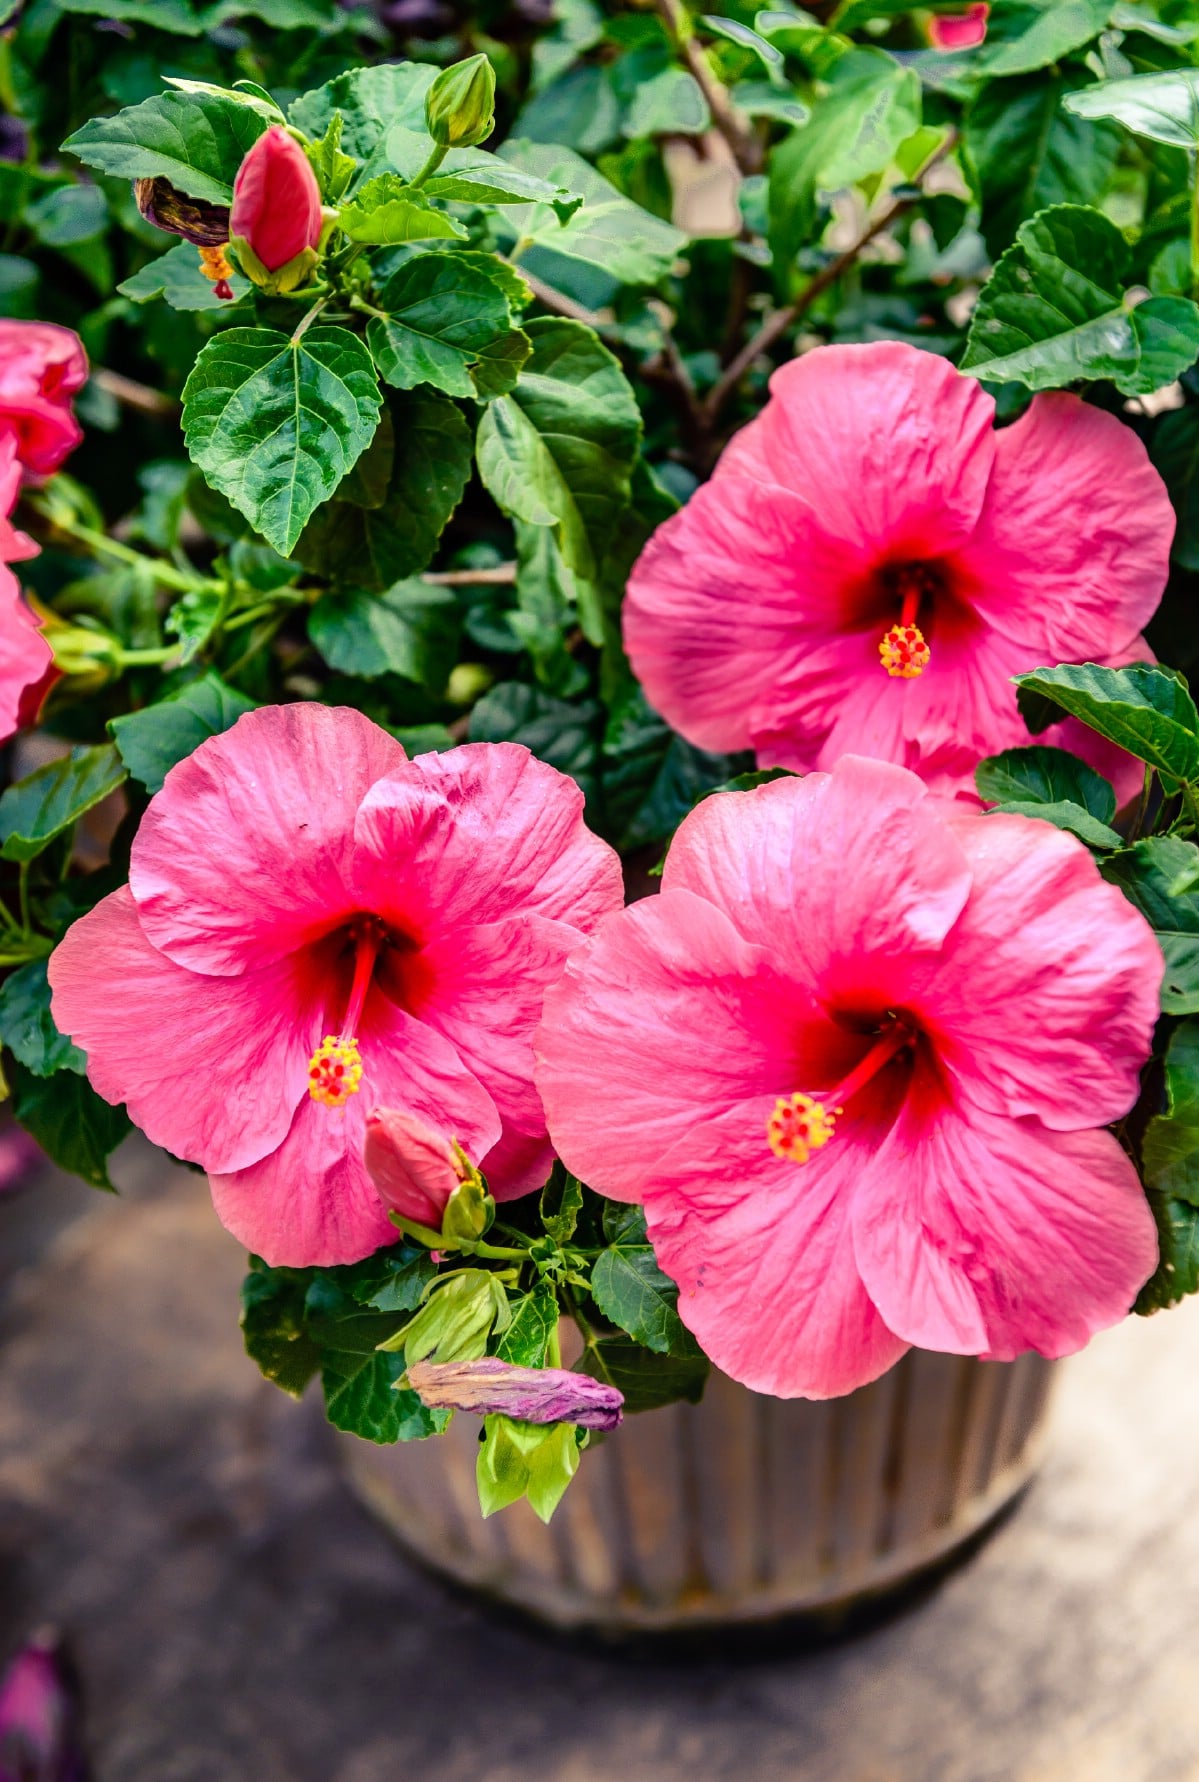 Hibiscus flowers in a pot.